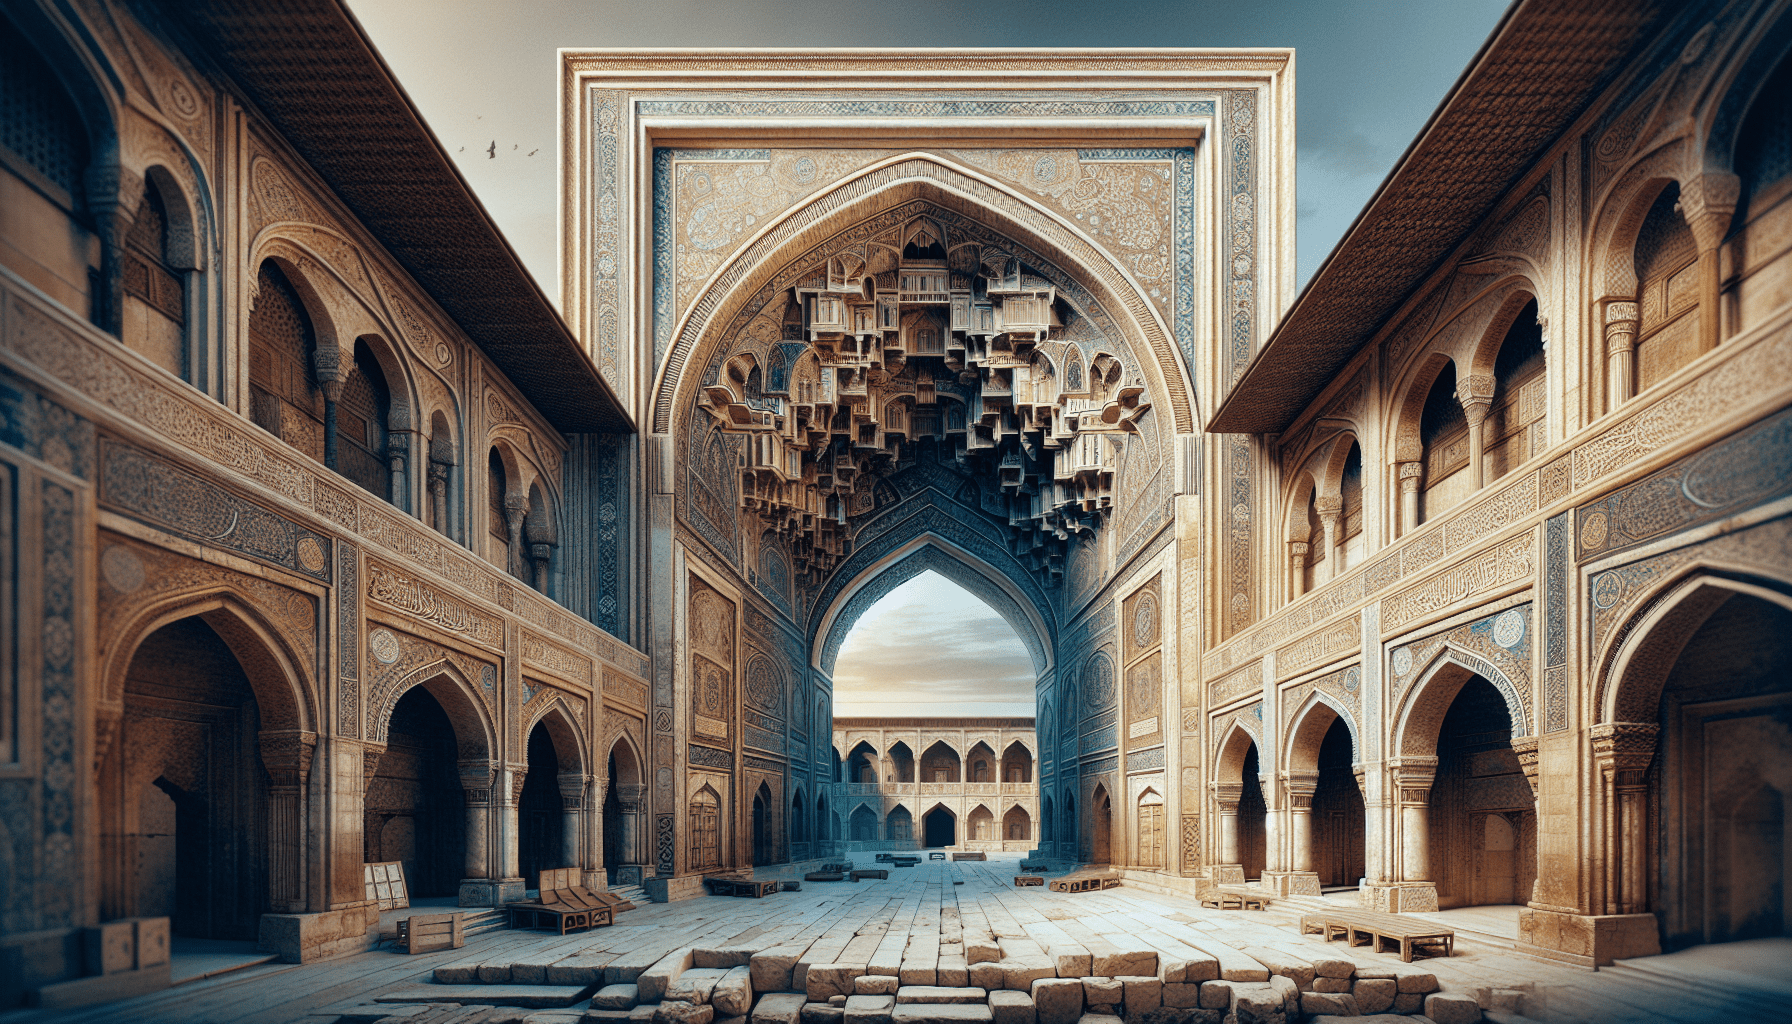 A grand, intricately designed courtyard with high archways, detailed carvings, and a symmetrical layout. The architecture features a mix of traditional and geometric elements against a clear sky backdrop.